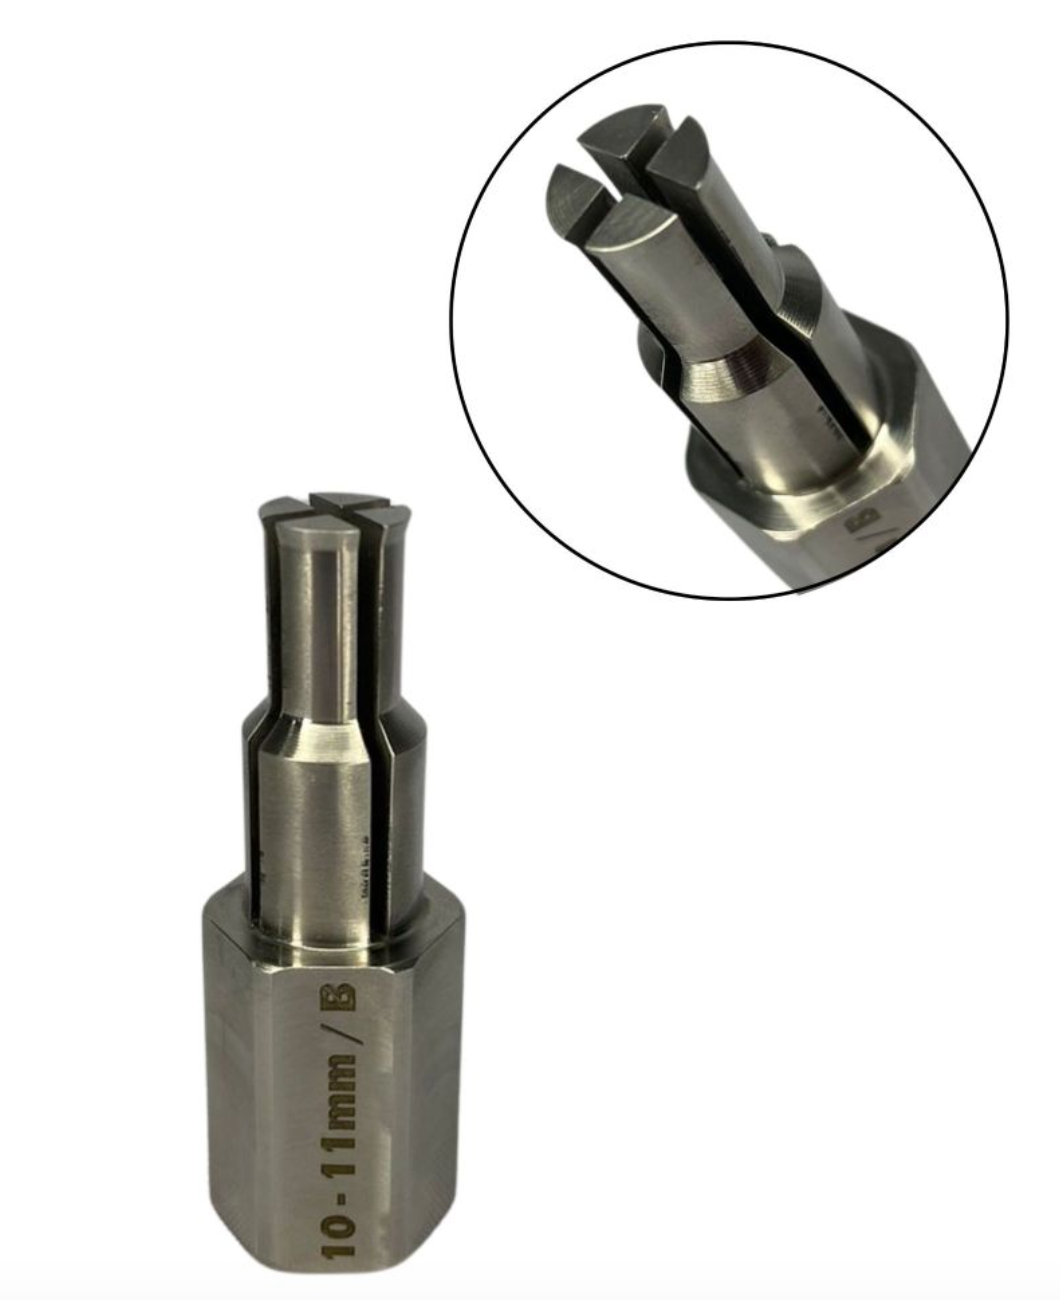 Bearing Extraction Tool (6mm to 30mm inner width bearings)